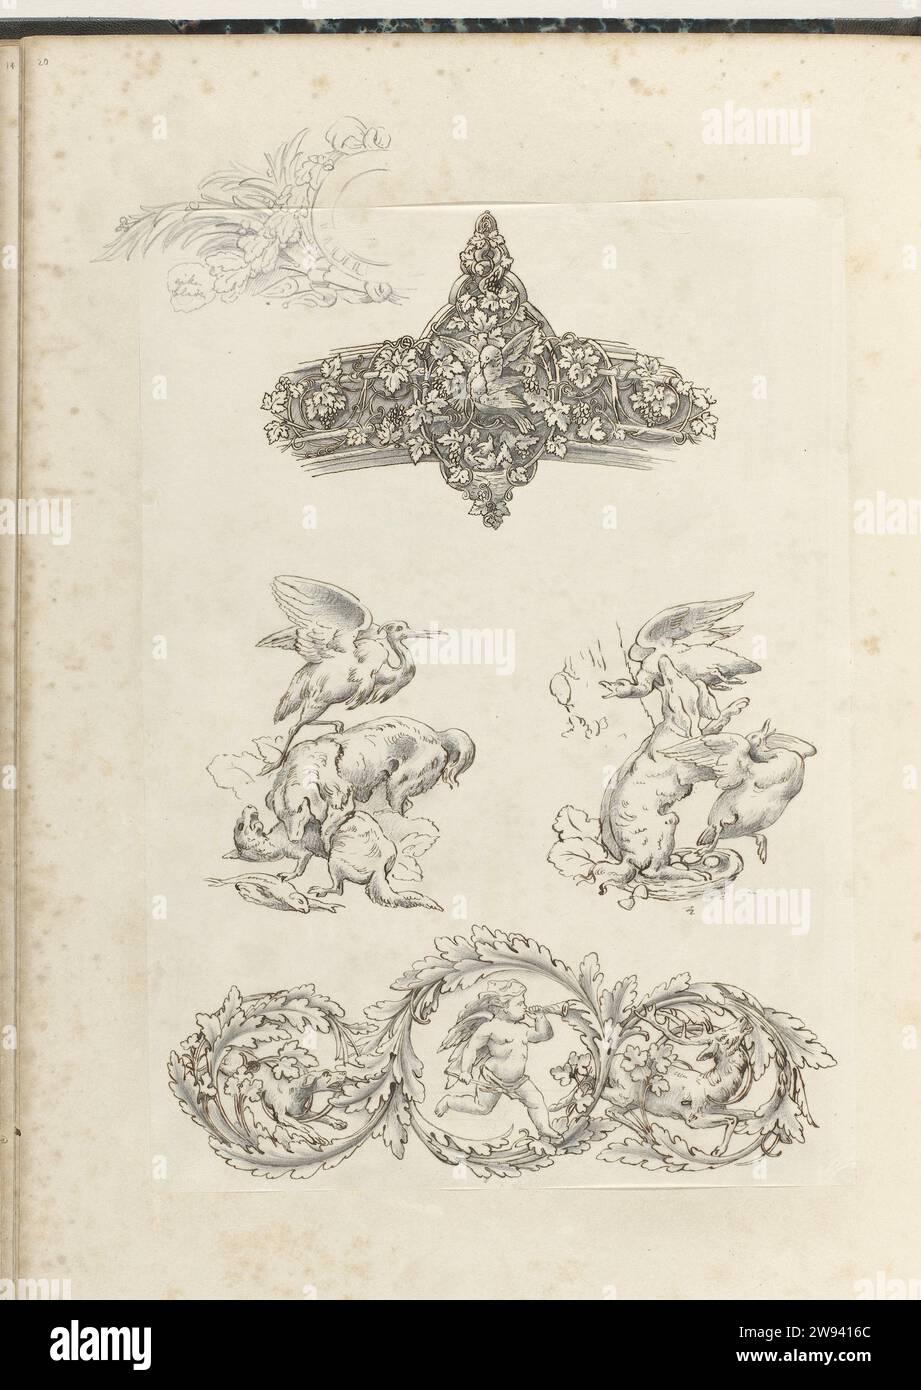 Three ornaments and two attacking dogs, c. 1866 - c. 1900 drawing At the bottom, a dog and a putto run after a deer through three volutes of leaf vines. In addition, there are two drawings of a dog attacking animals.  tracing paper. ink. pencil drawing Stock Photo